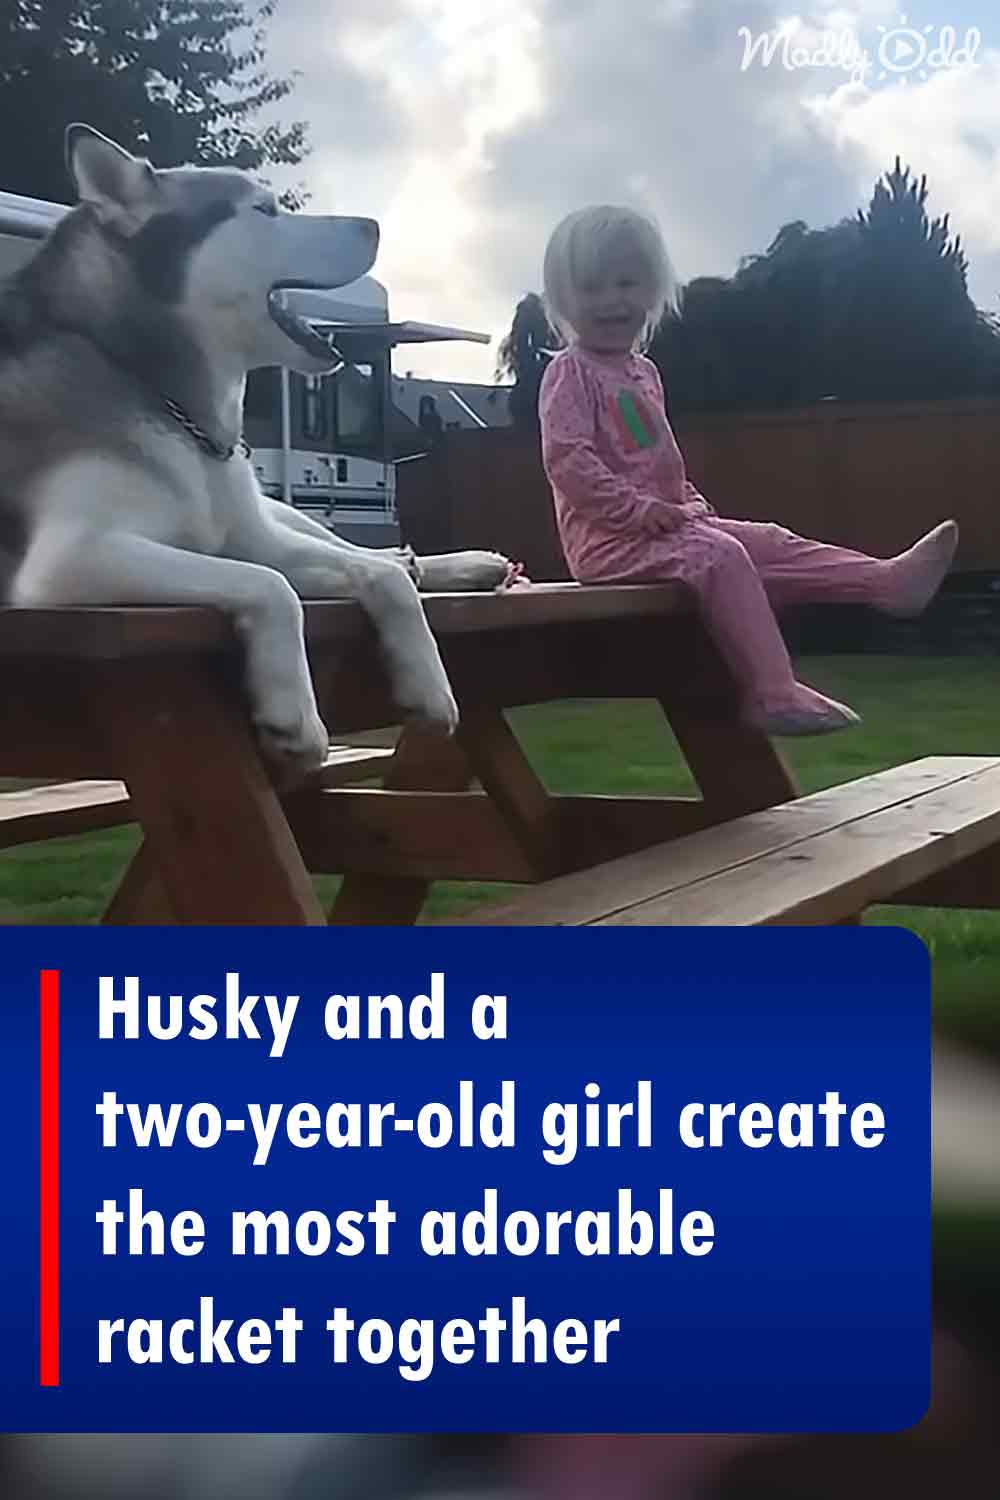 Husky and a two-year-old girl create the most adorable racket together